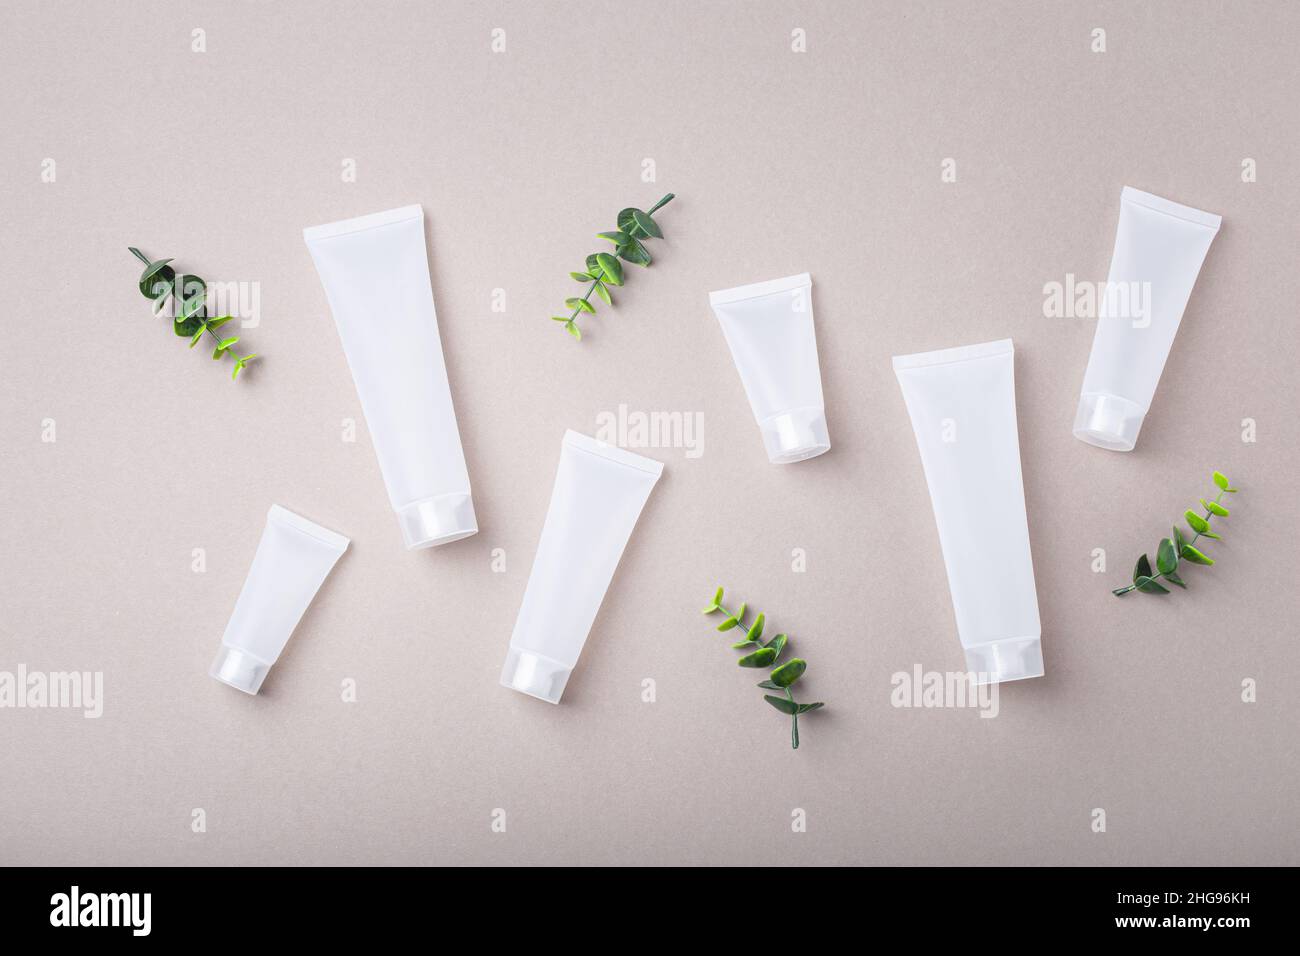 Skincare organic beauty product bottles, green plant leaves on gray background Stock Photo